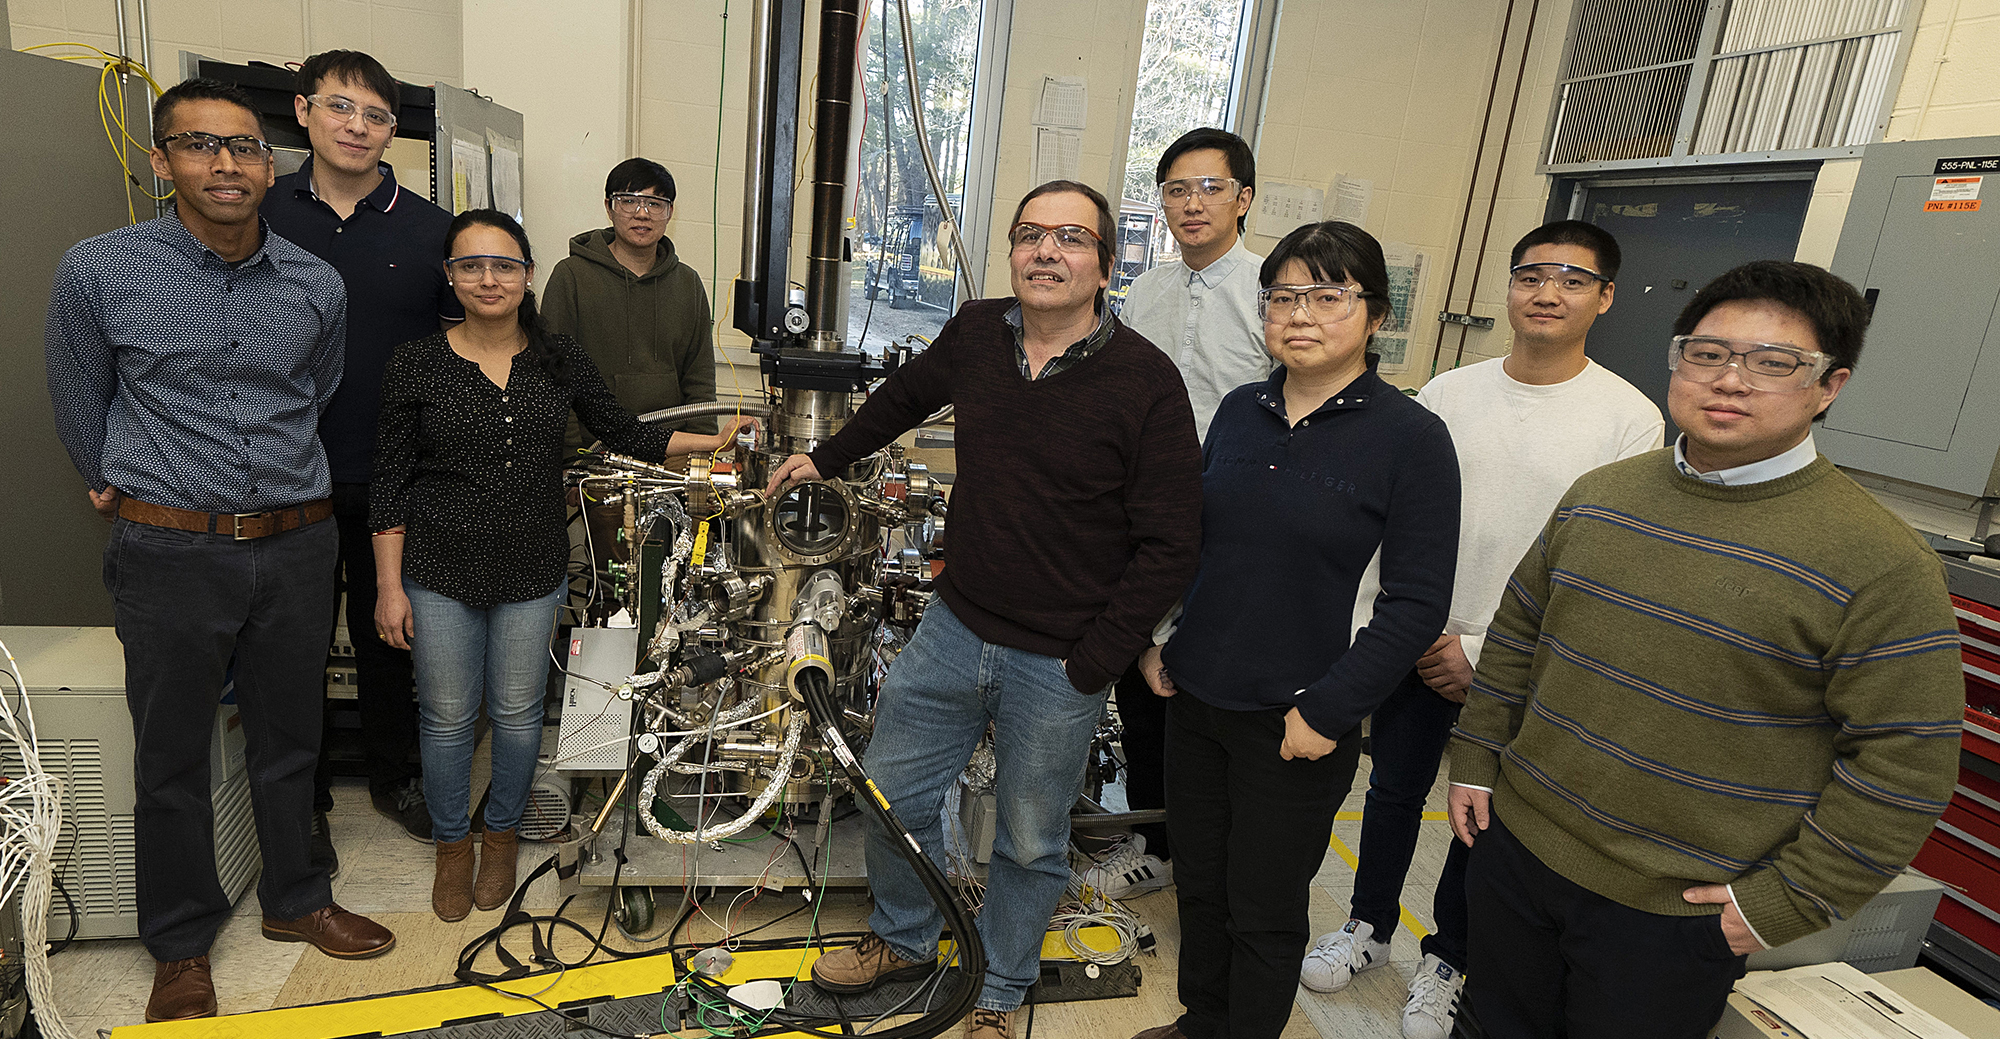 Group photo in lab setting.